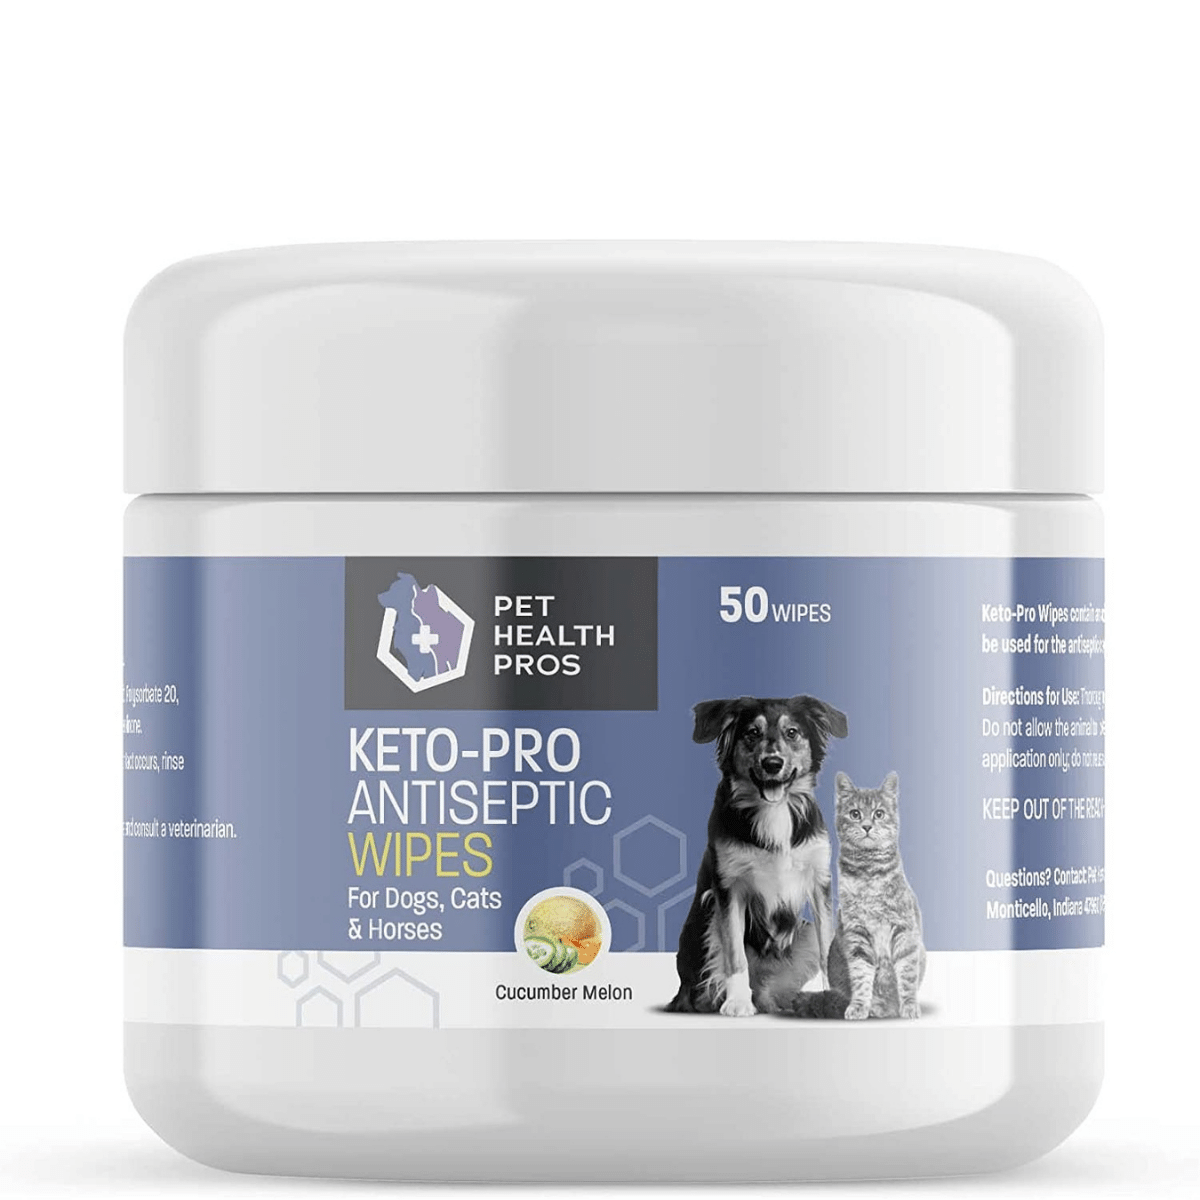 Cleansing Dog Wipes - Soothing Pet Wipes for Skin Relief